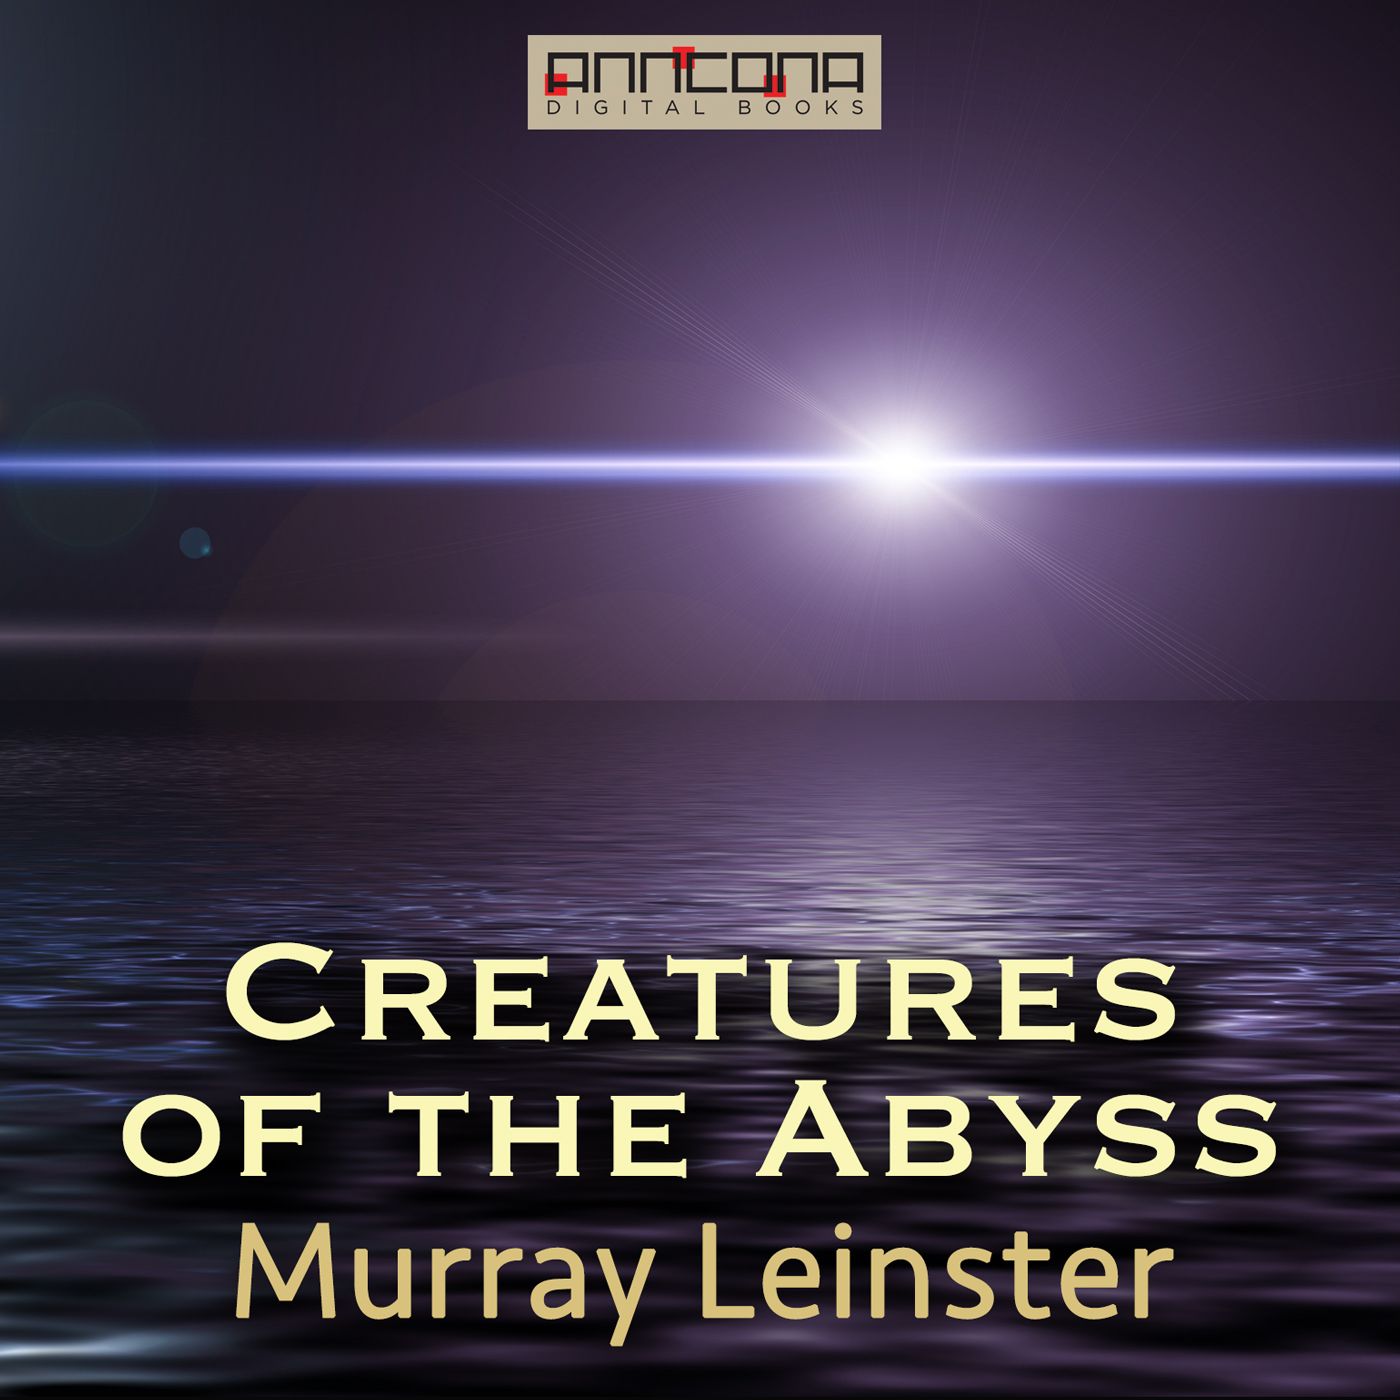 Creatures of the Abyss, lydbog af Murray Leinster